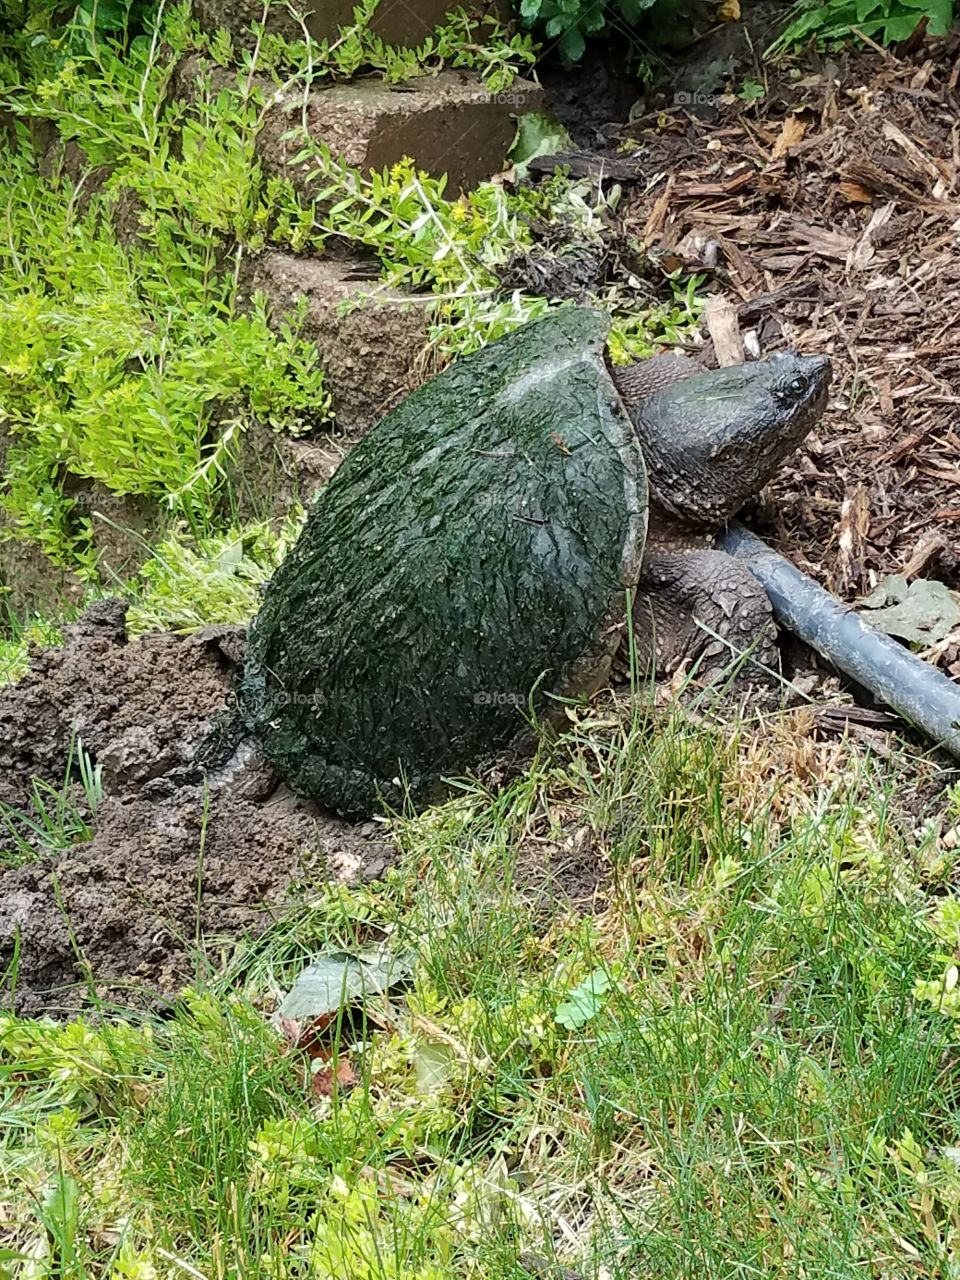 Mossy turtle emerges